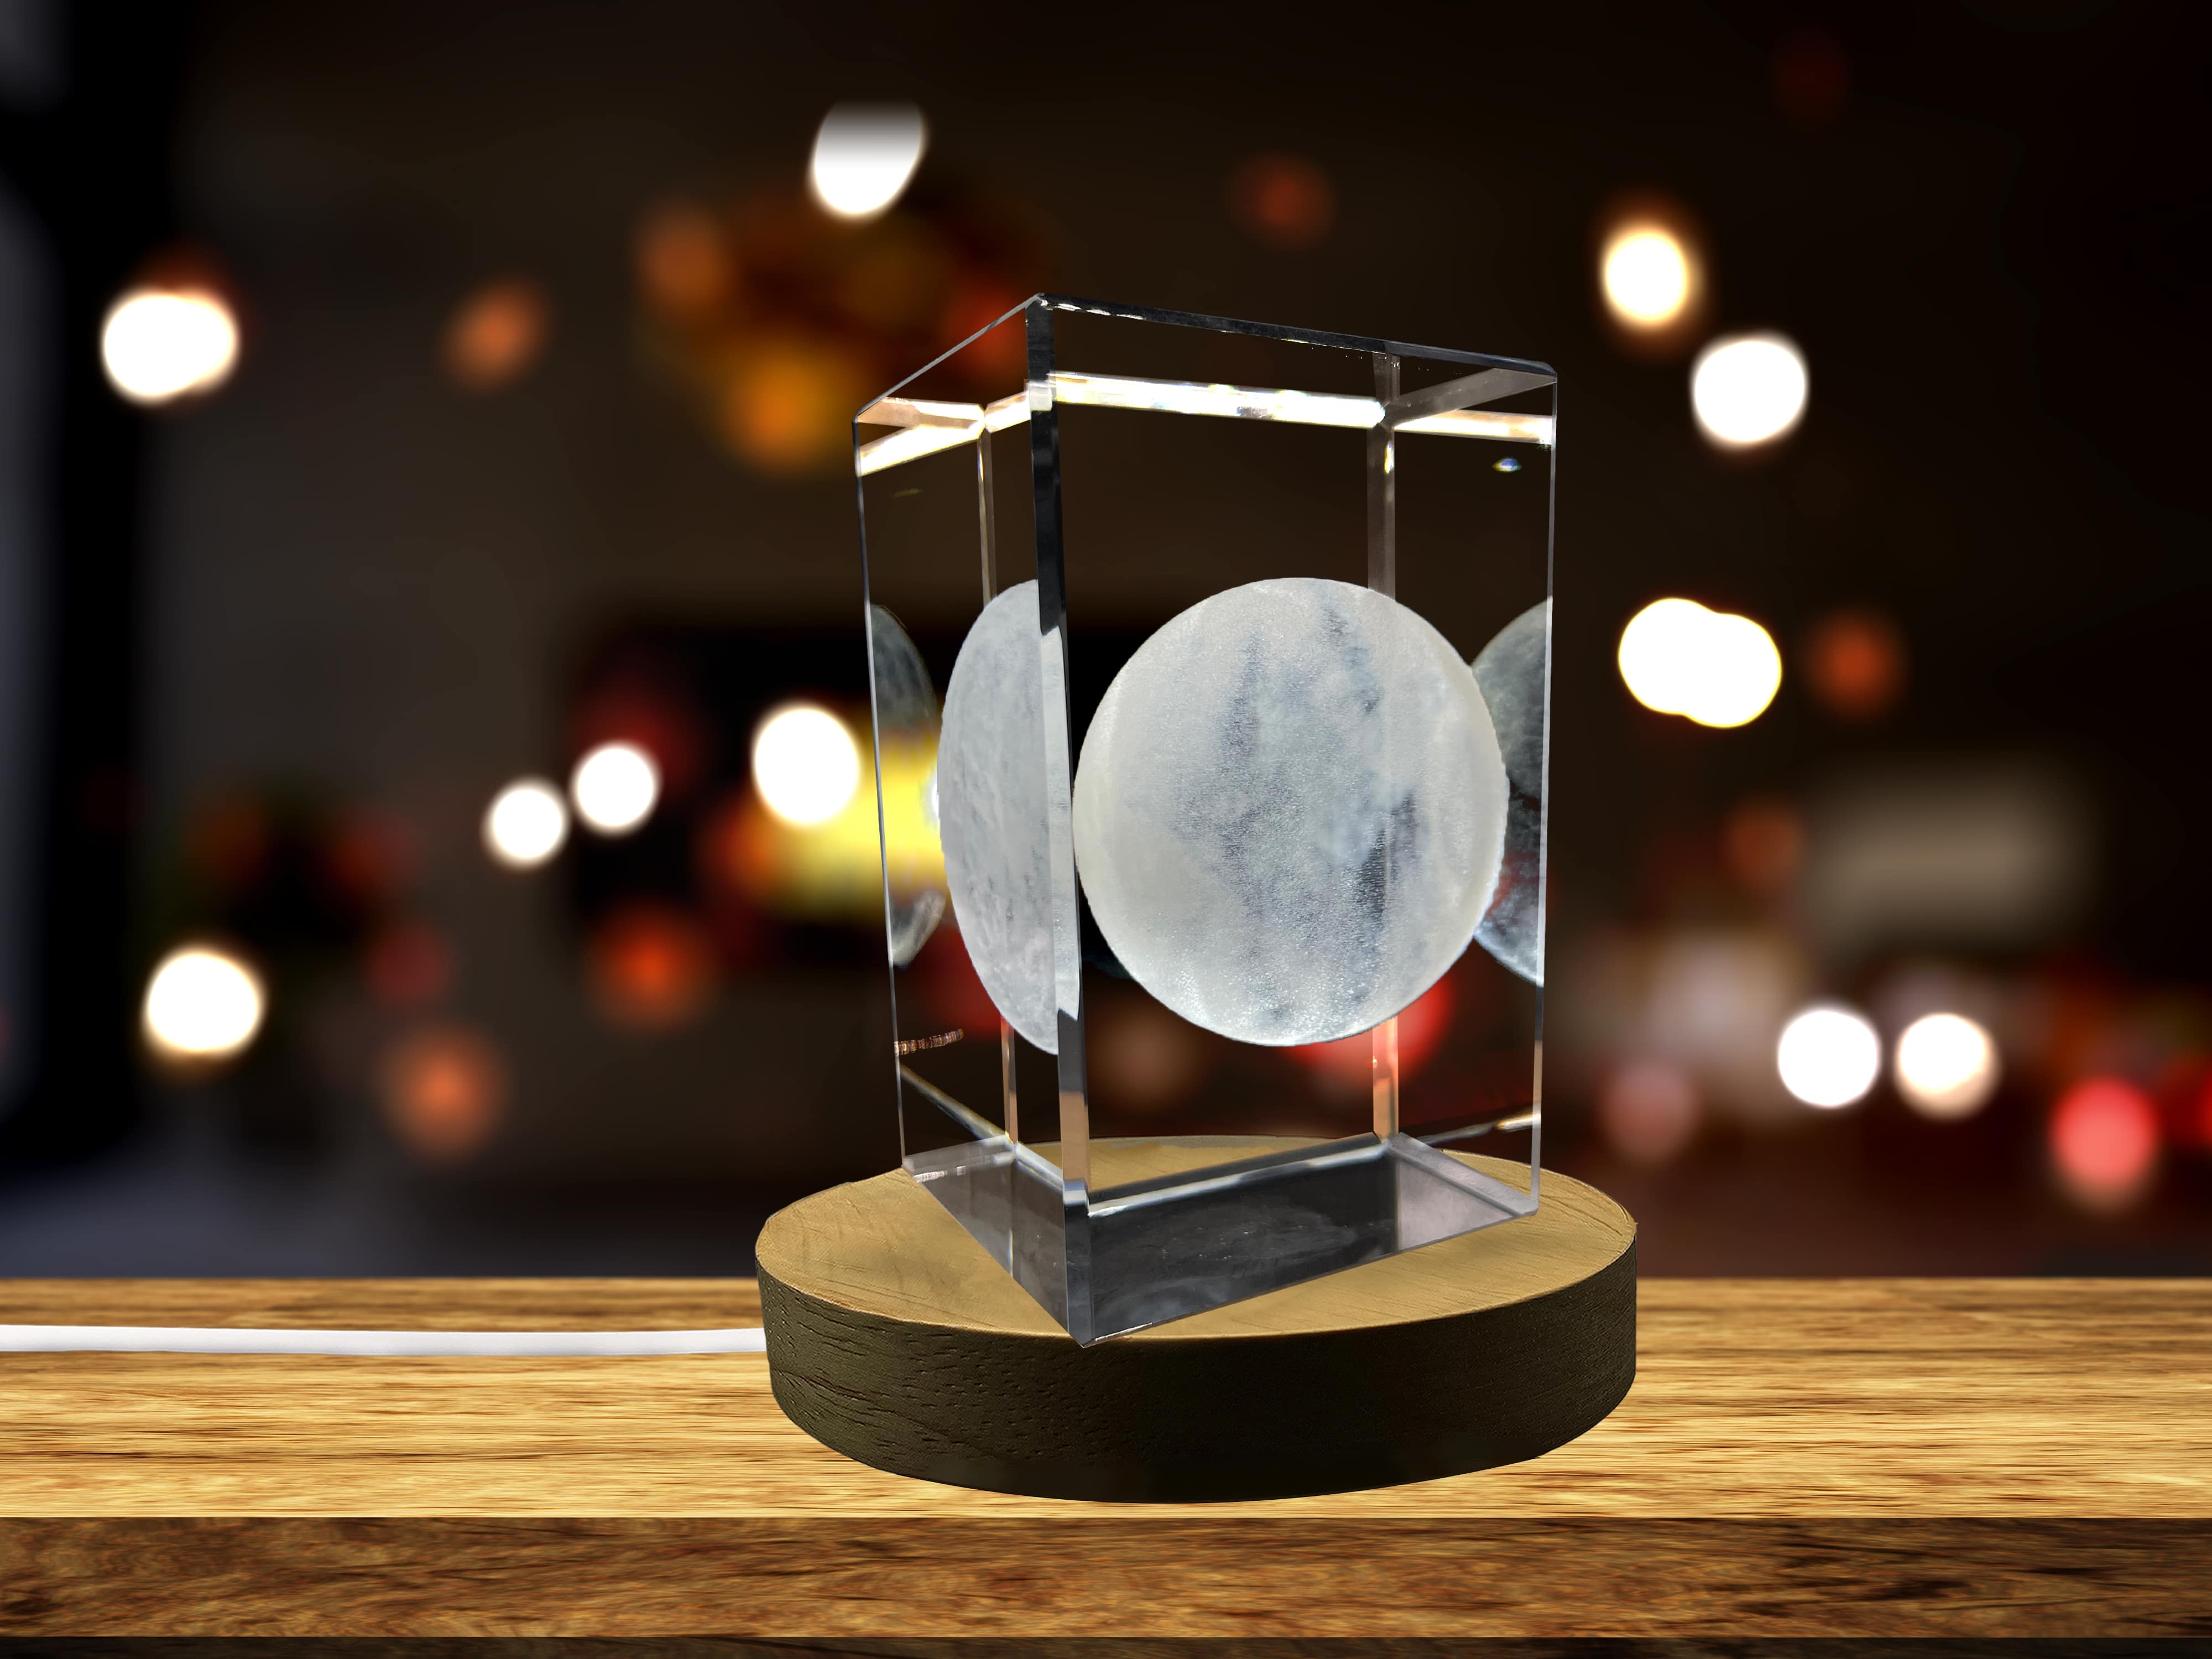 Eris 3D Engraved Crystal Novelty Decor - Realistic Depiction of the Dwarf Planet Eris | LED Base Light Included A&B Crystal Collection